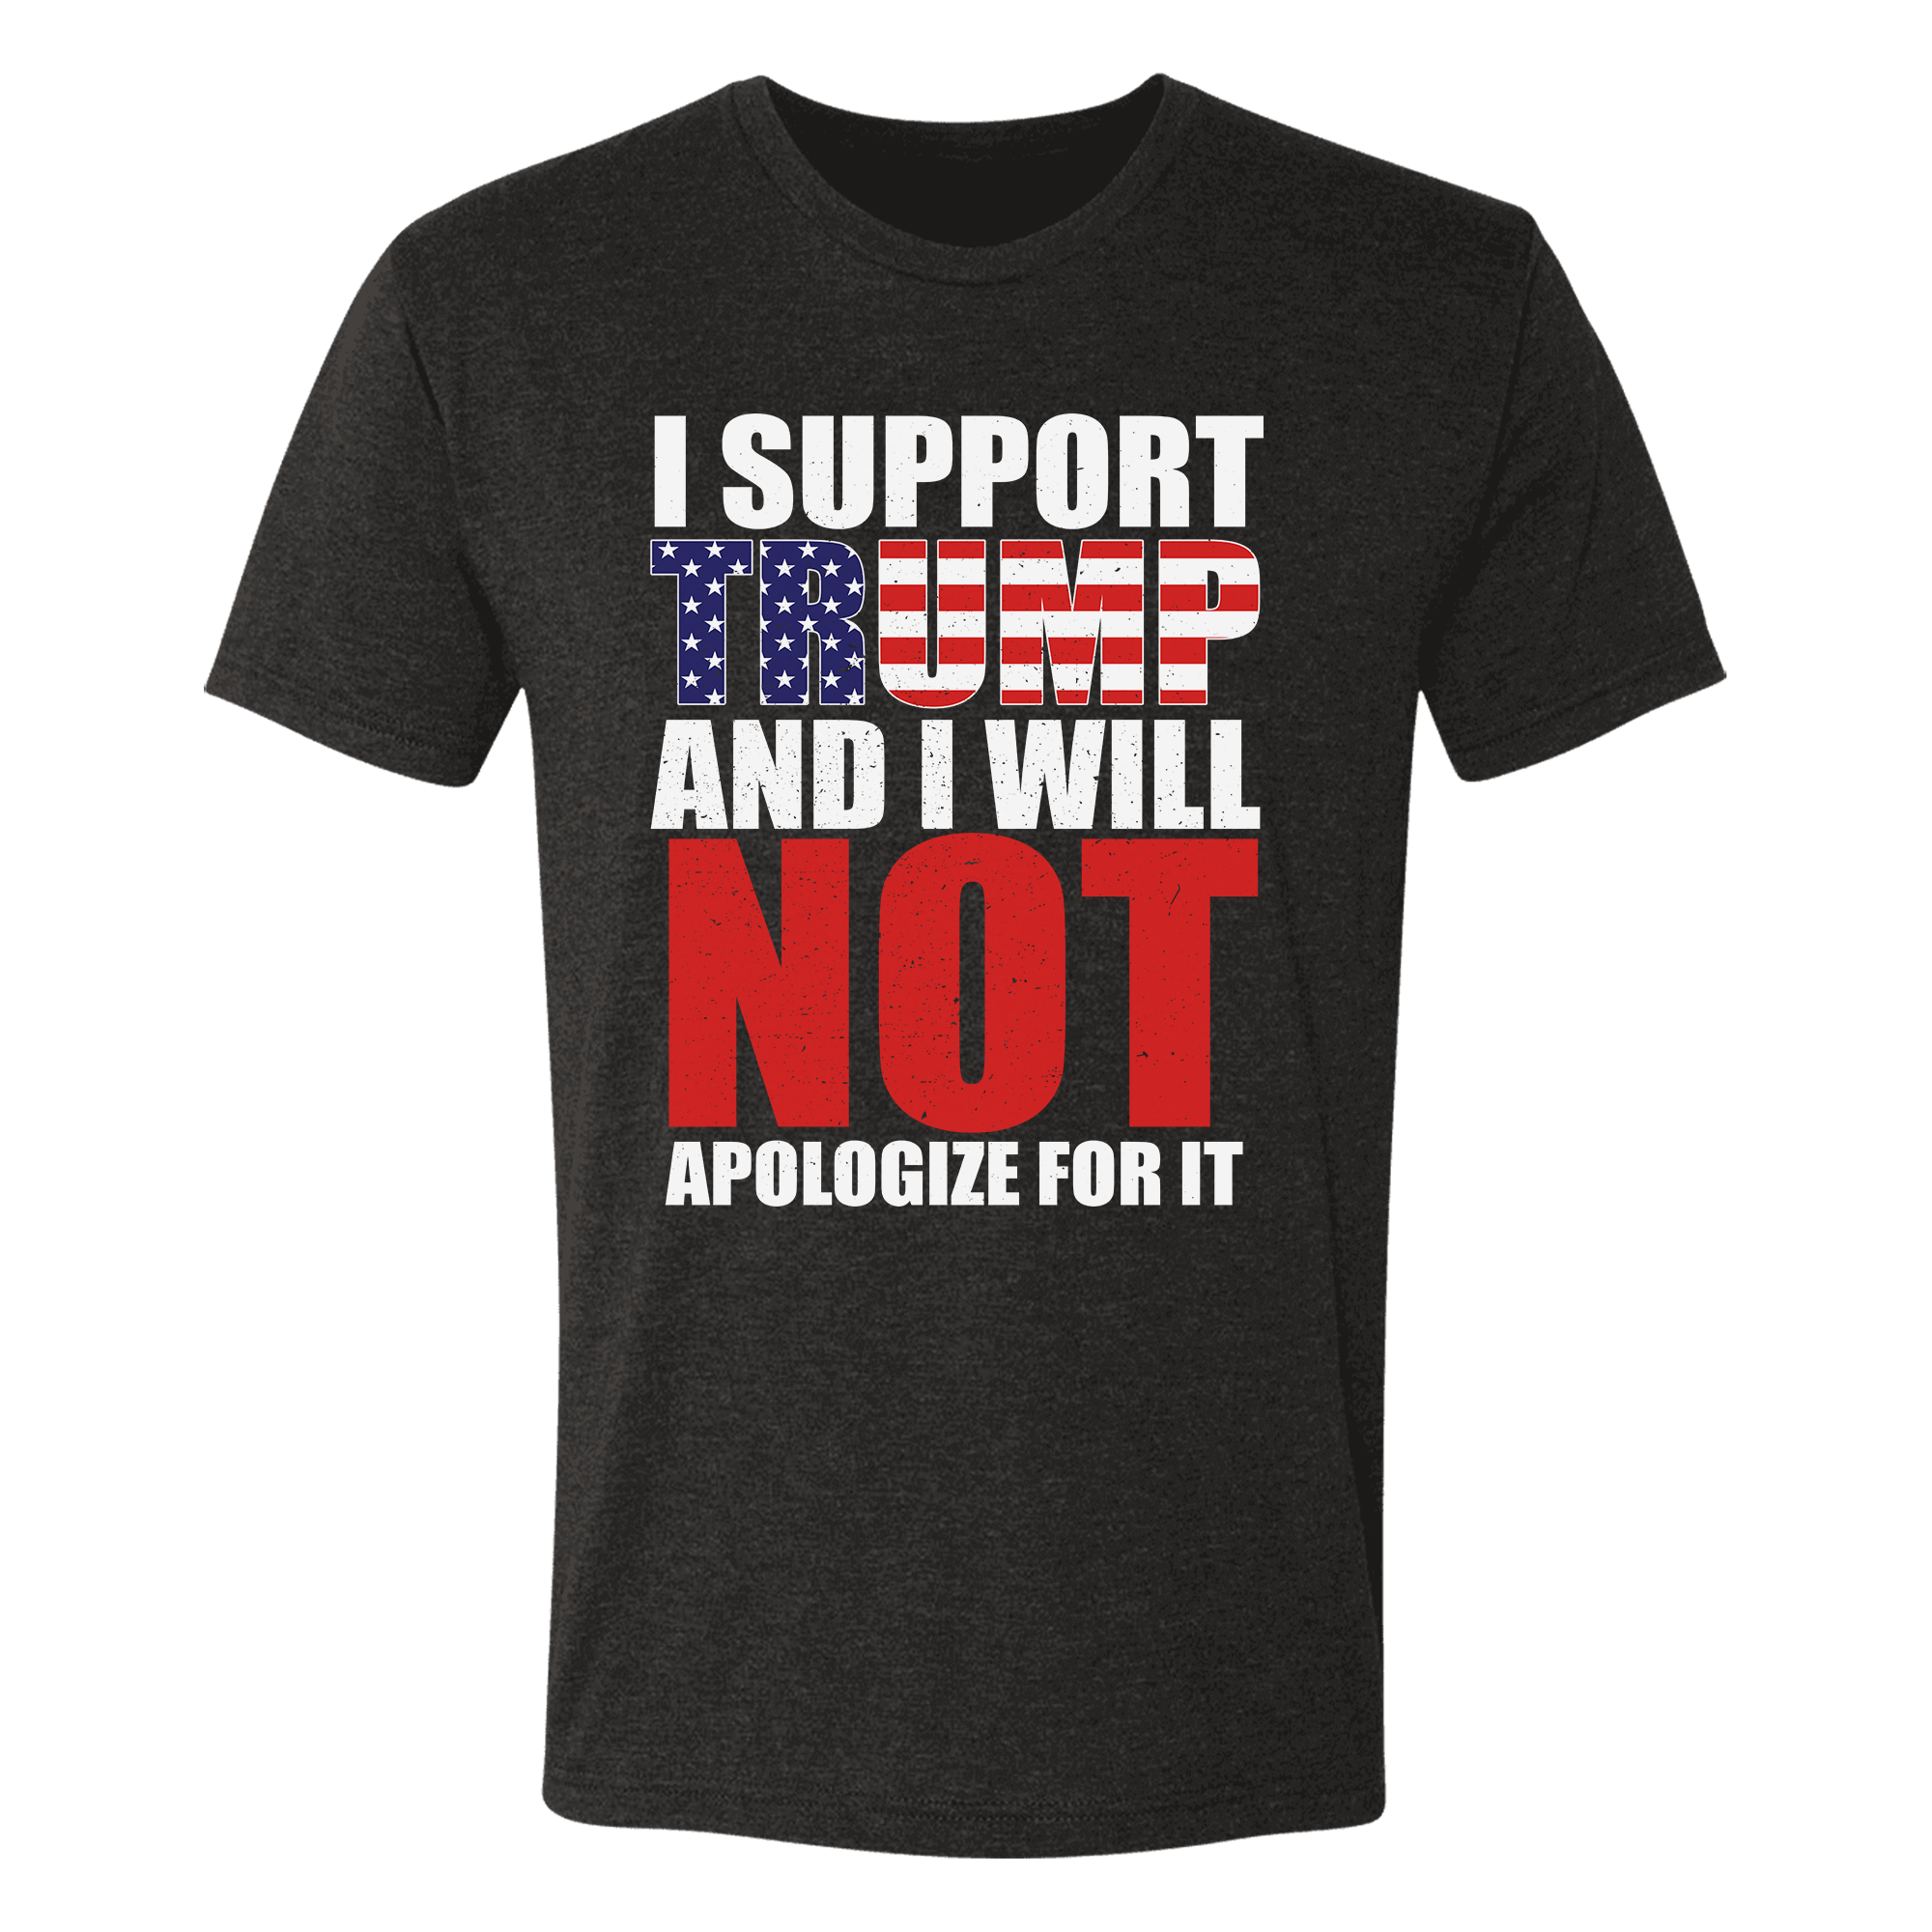 I Support Trump And I Will Not Apologize For It T-Shirt - GB90